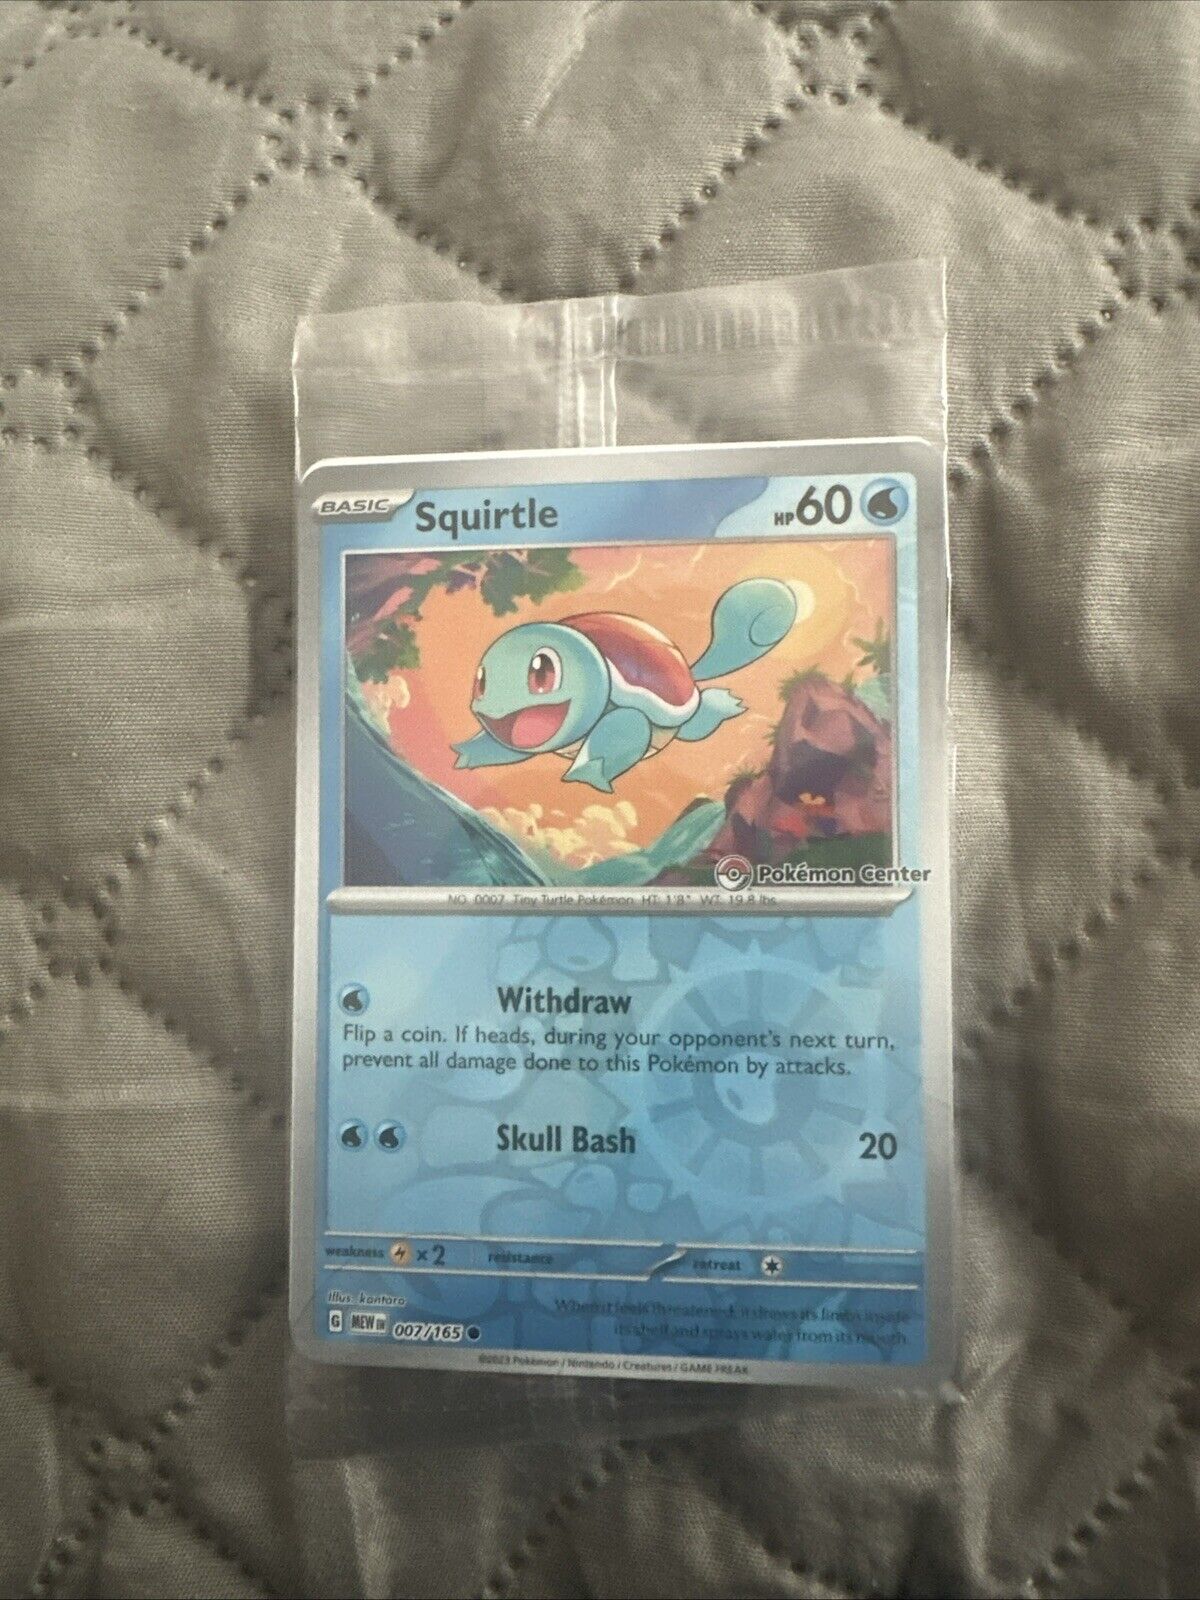 Squirtle 007/165 - Pokemon Center Stamped 151 Promo Reverse Holo Card - Sealed